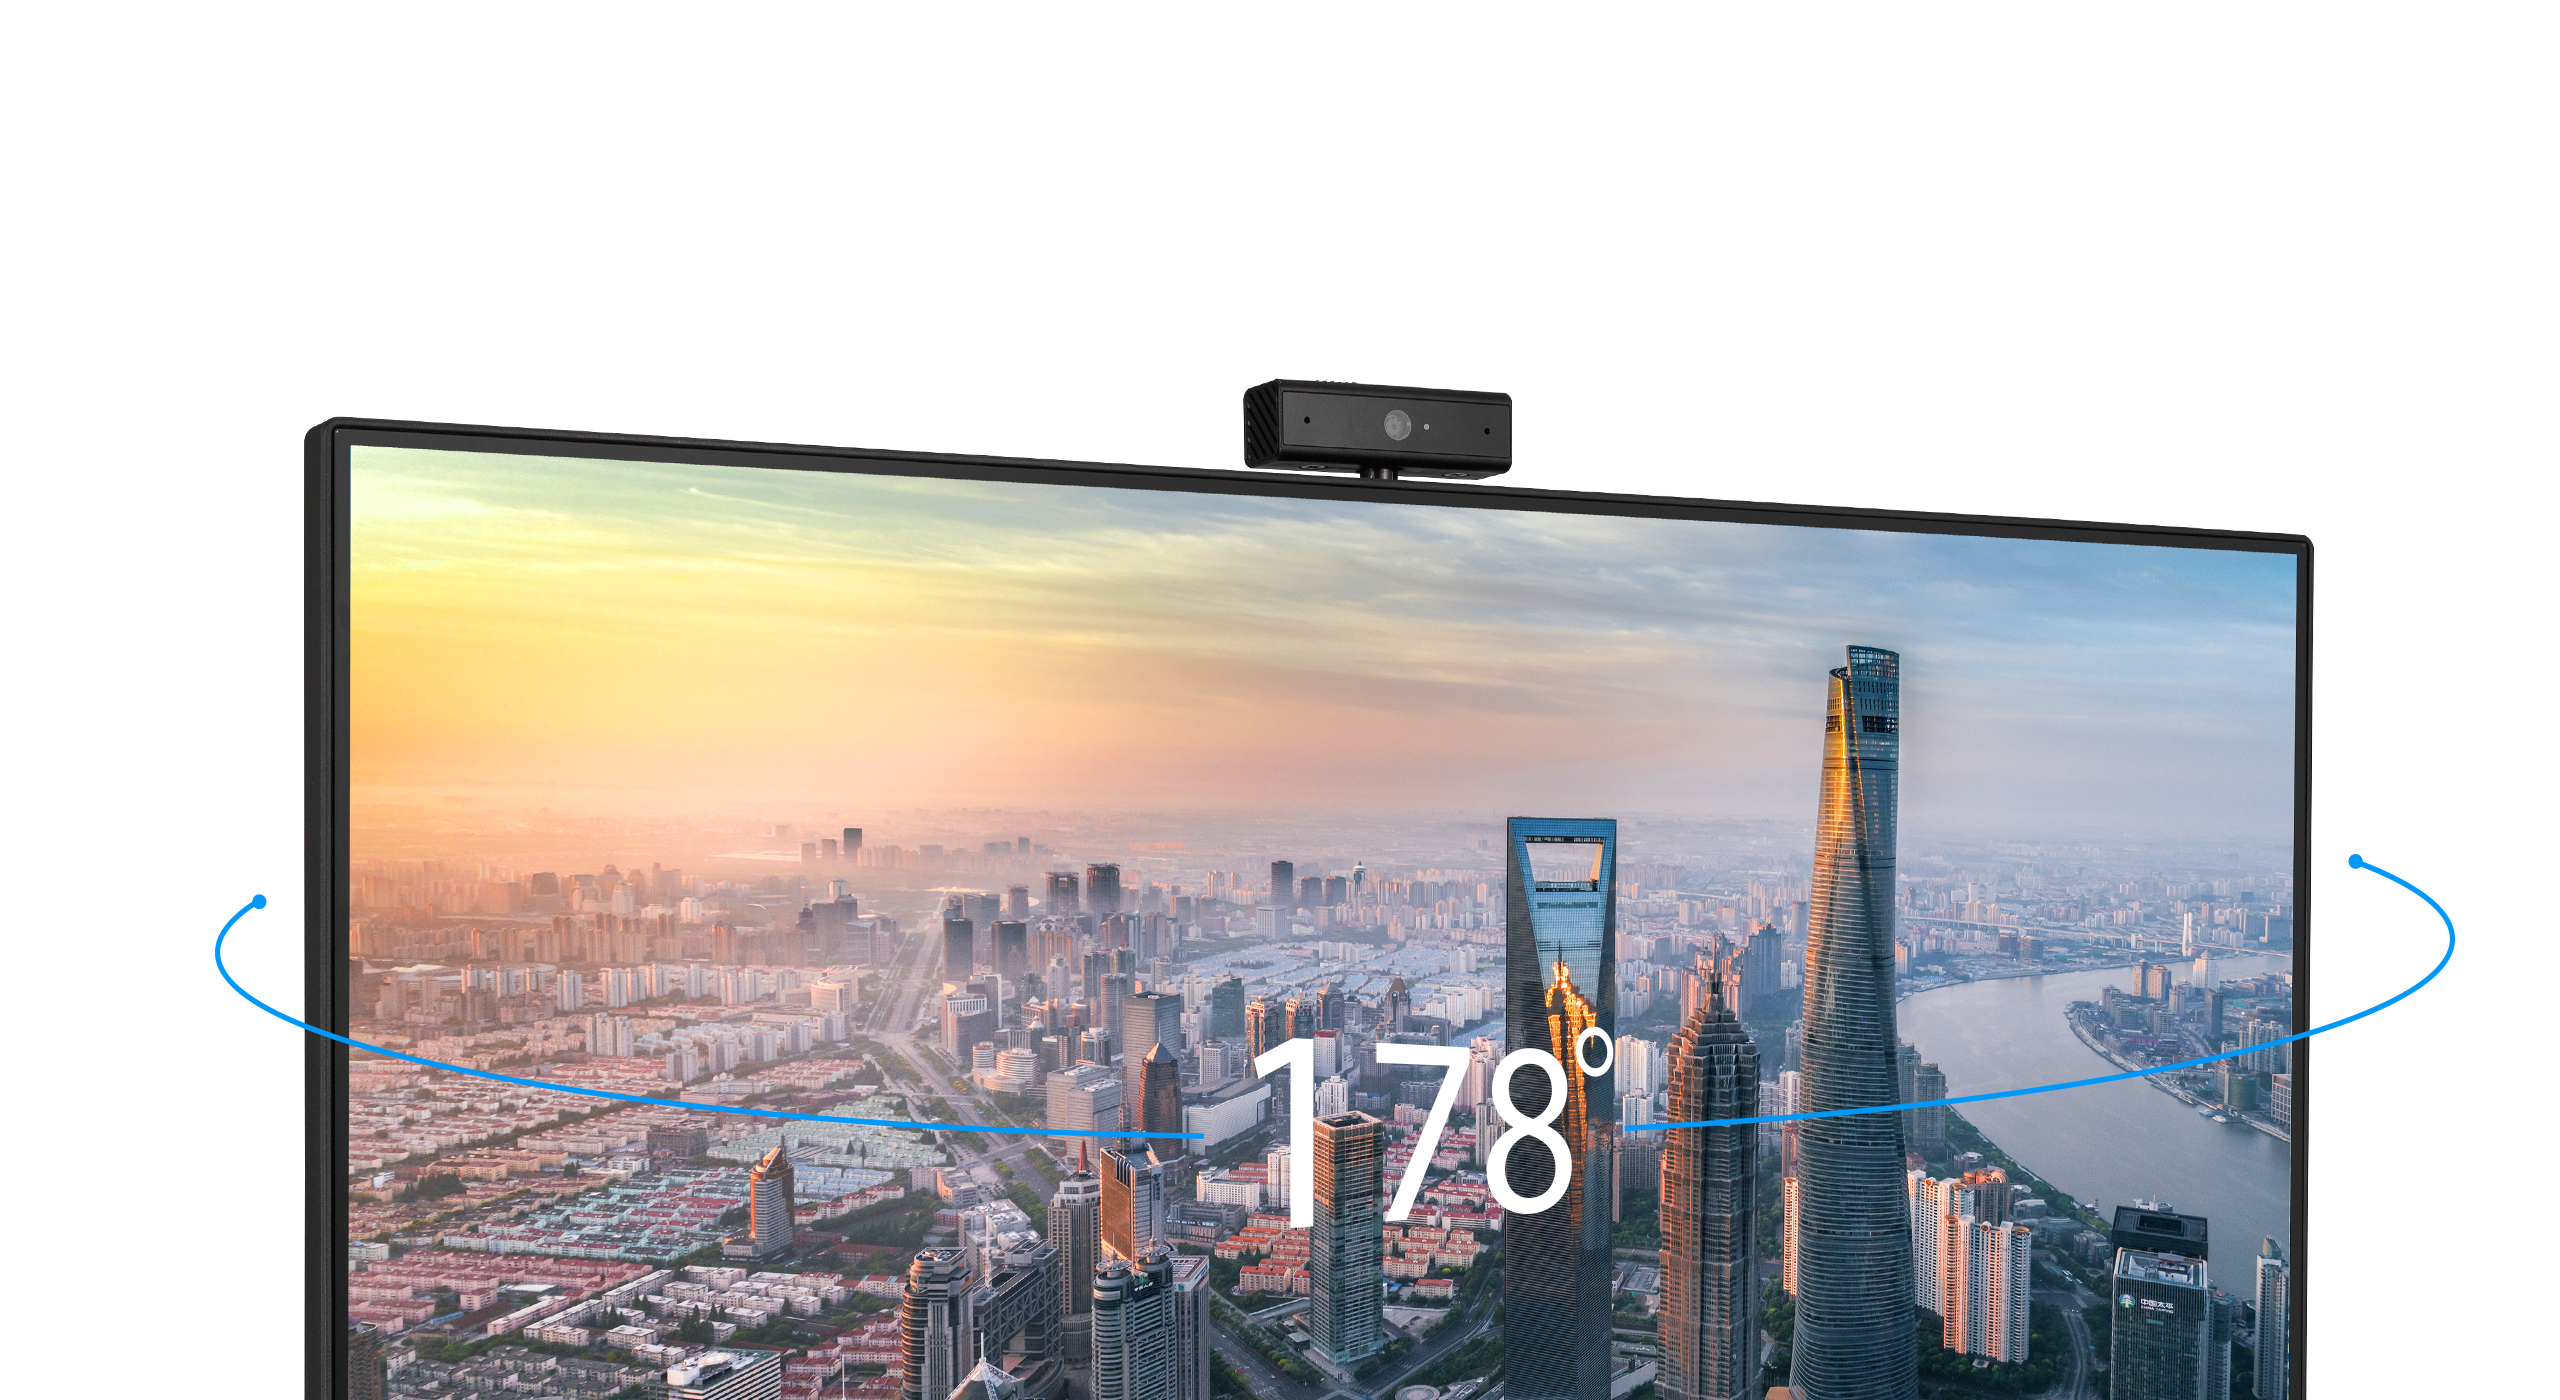 ASUS BE279QSK monitor offers wide 178° viewing angles